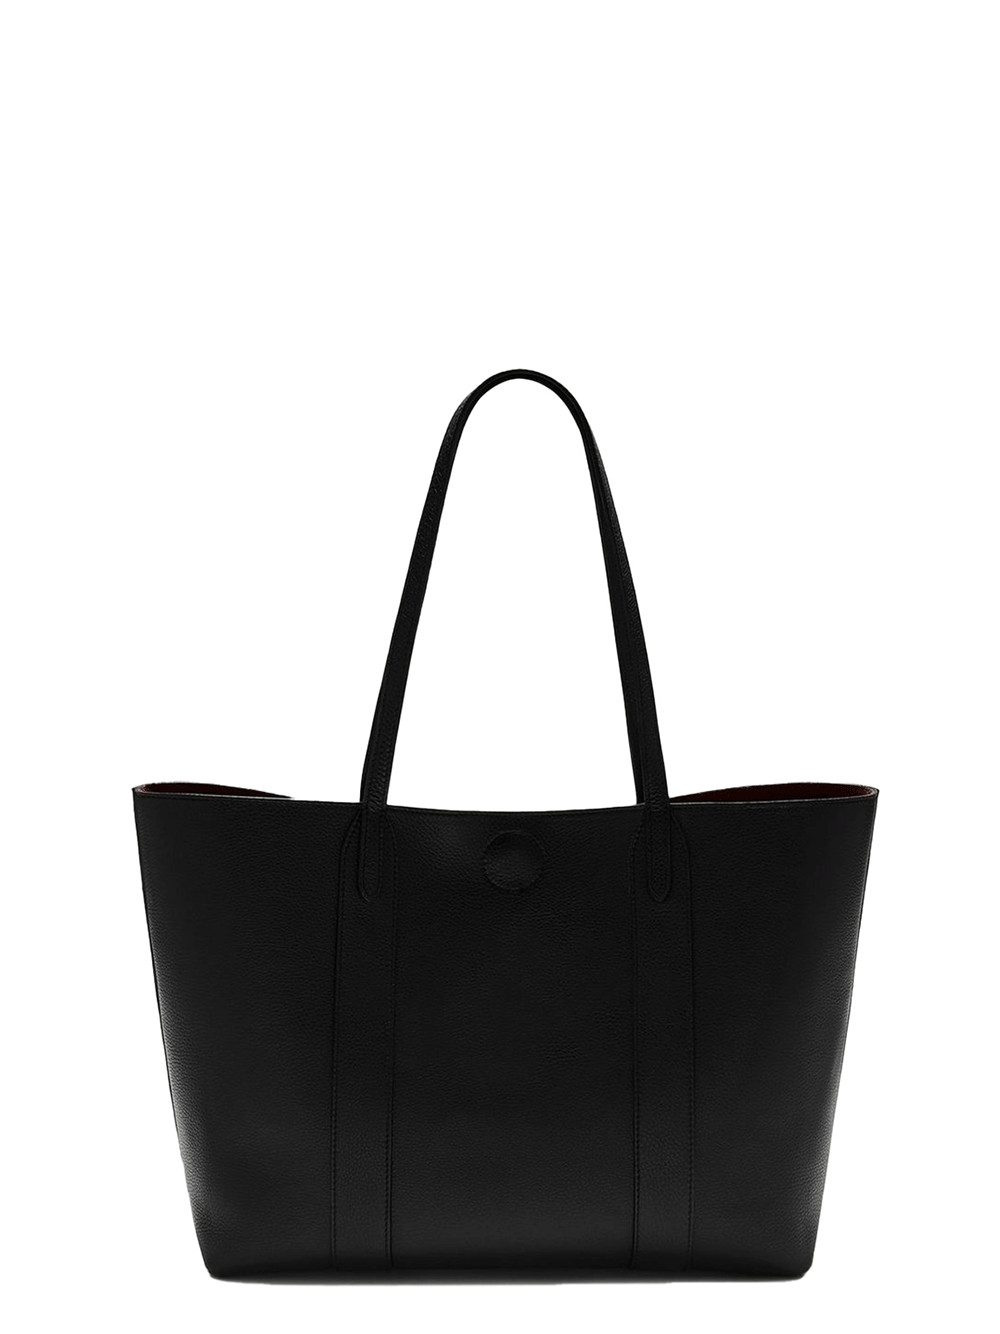 Mulberry-Bayswater-Tote-Small-Classic-Grain-Black-2